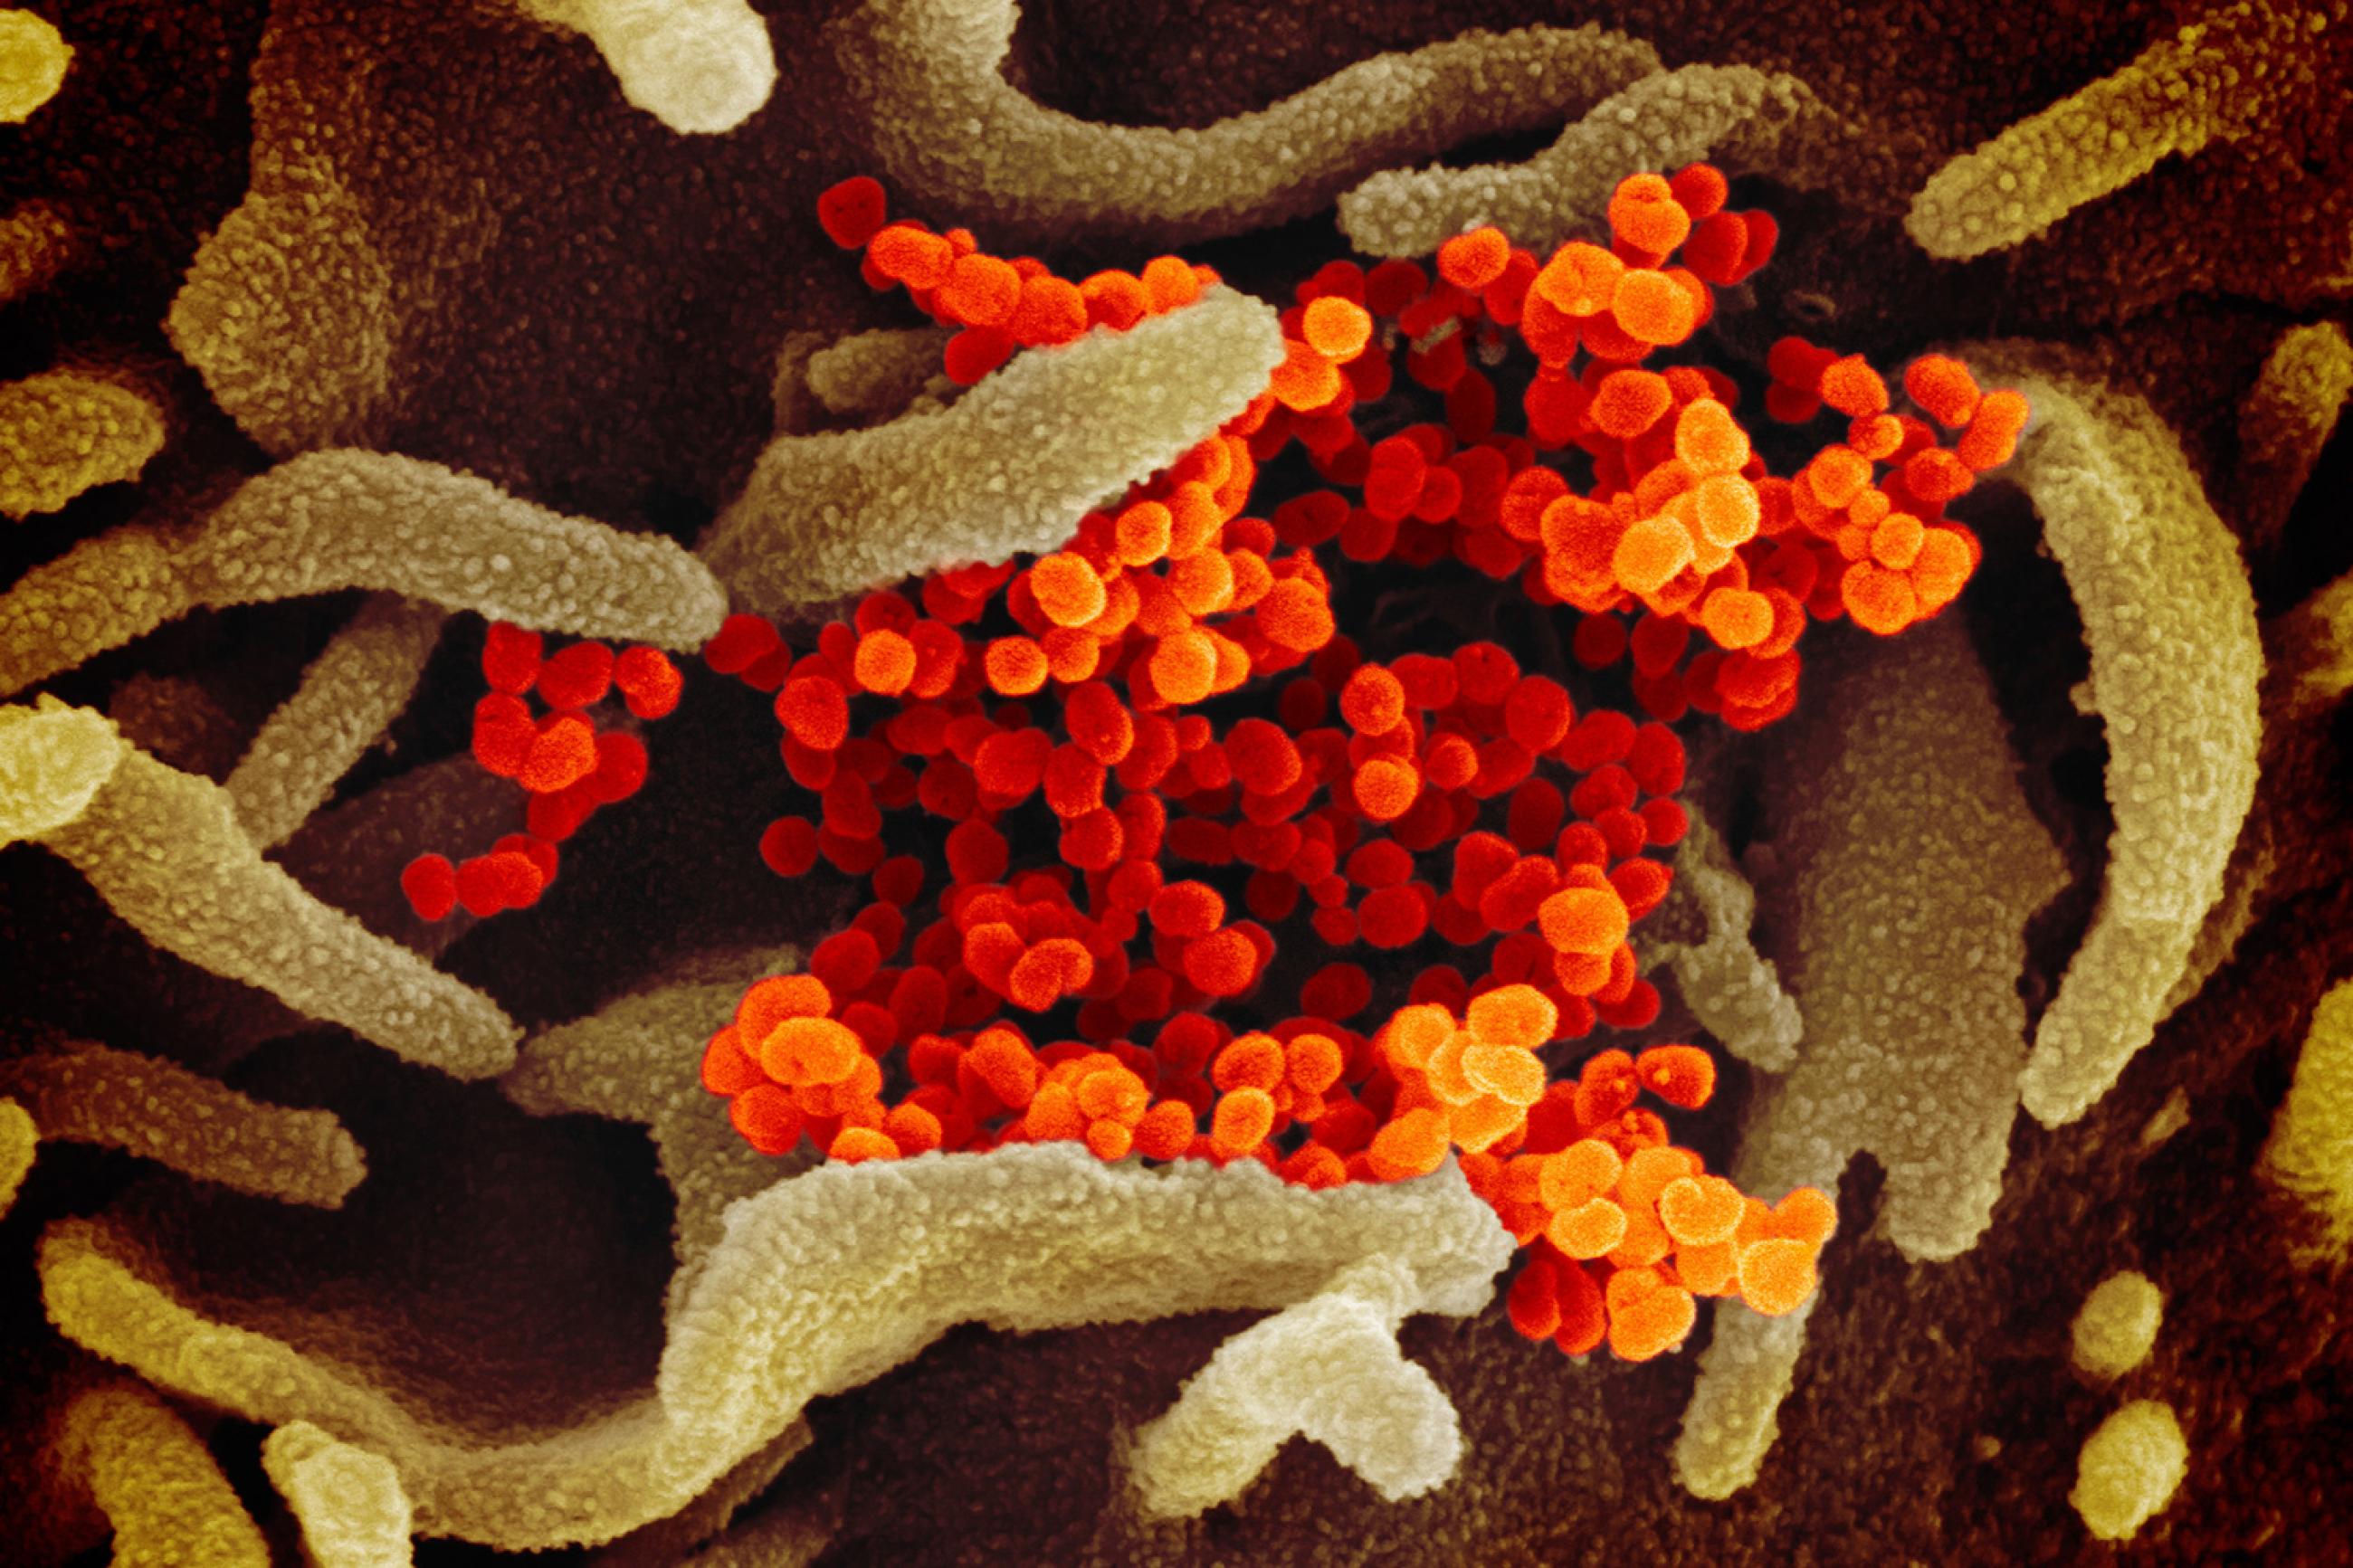 A colorized scanning electron microscope image of the novel coronavirus SARS-CoV-2, also known as 2019-nCoV, which causes COVID-19. Image shows a colorful molecular world with a bunch of worm-like dendrites, presumably biological material like cells, and bright orange cluster of spheres in the middle of the image. NIAID-RML image